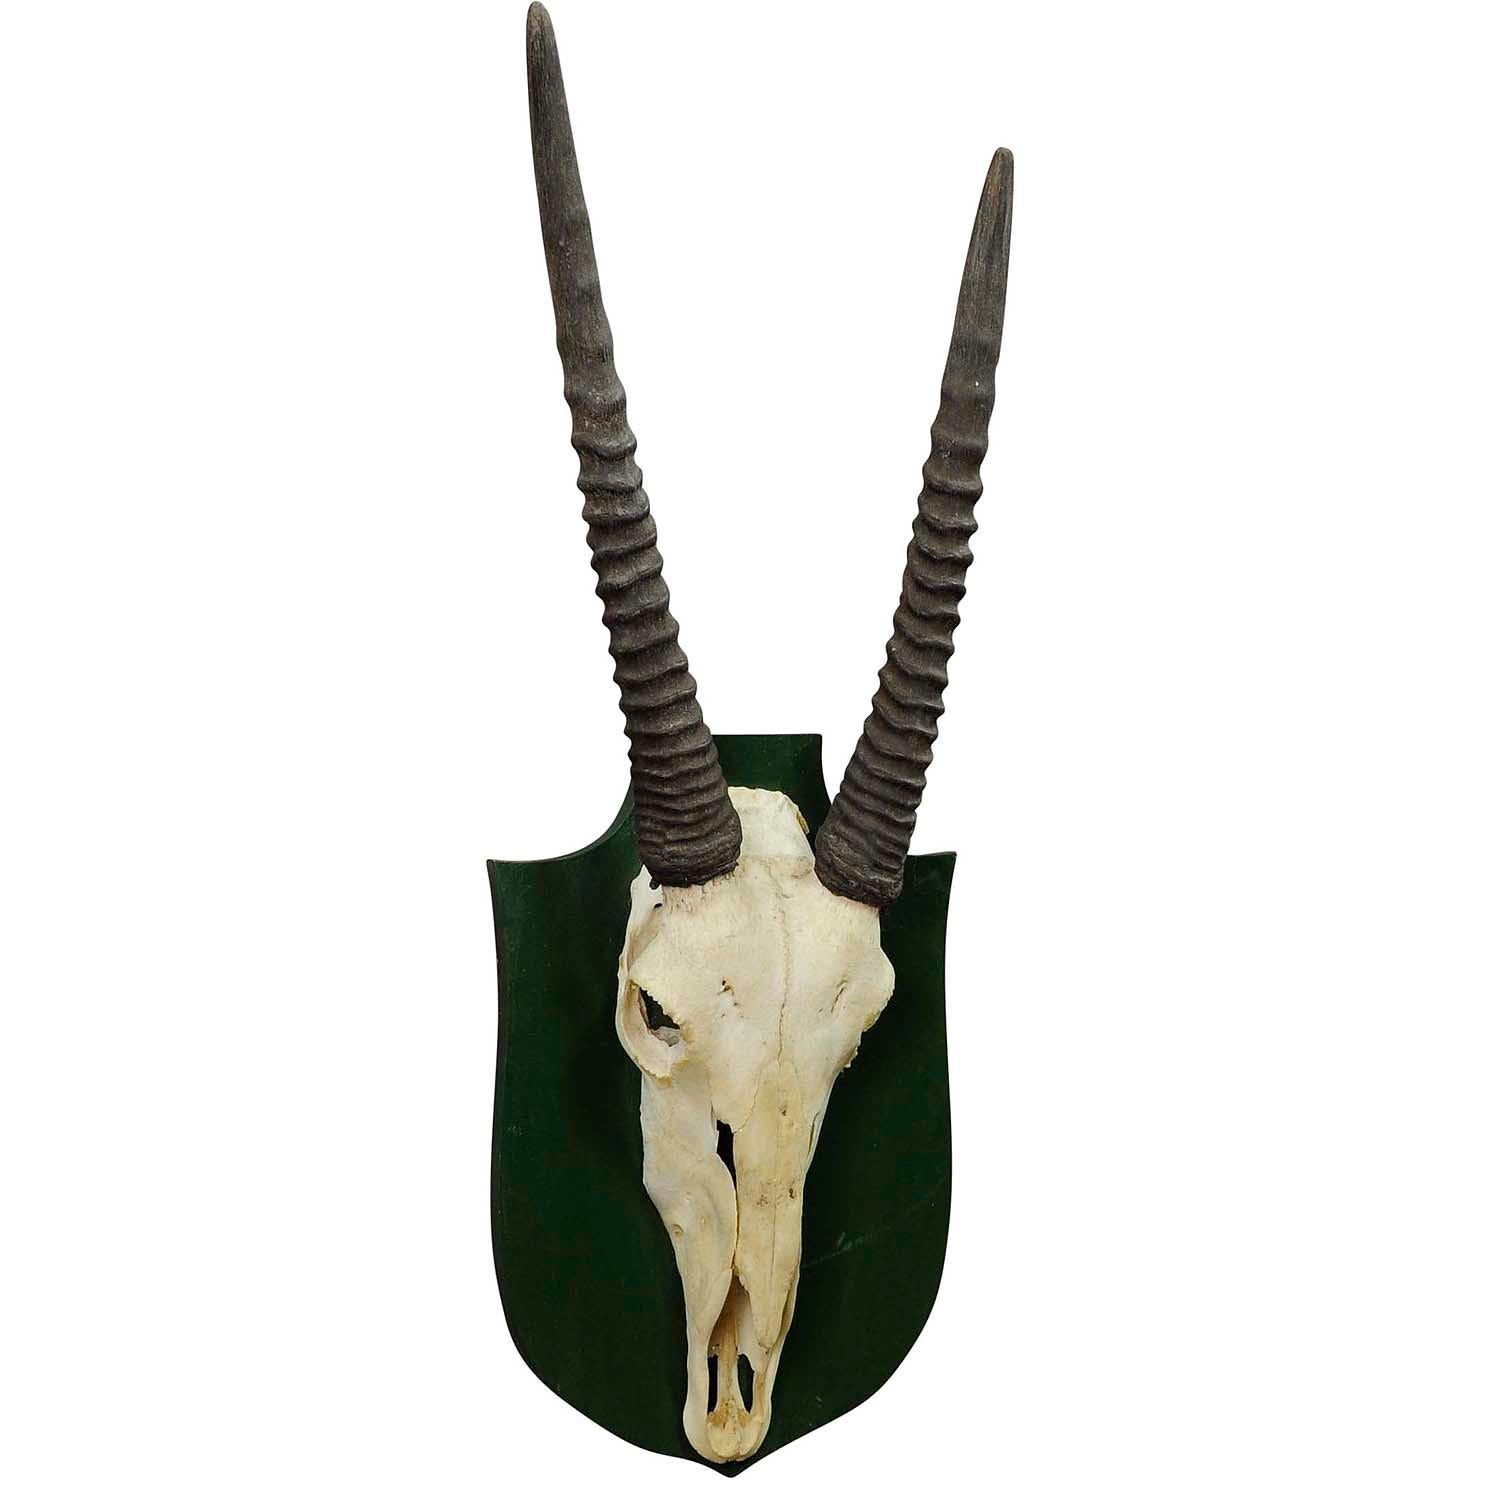 Spanish Trophy of a Oryx Anthelope from the Noble Estate Salem in South Germany